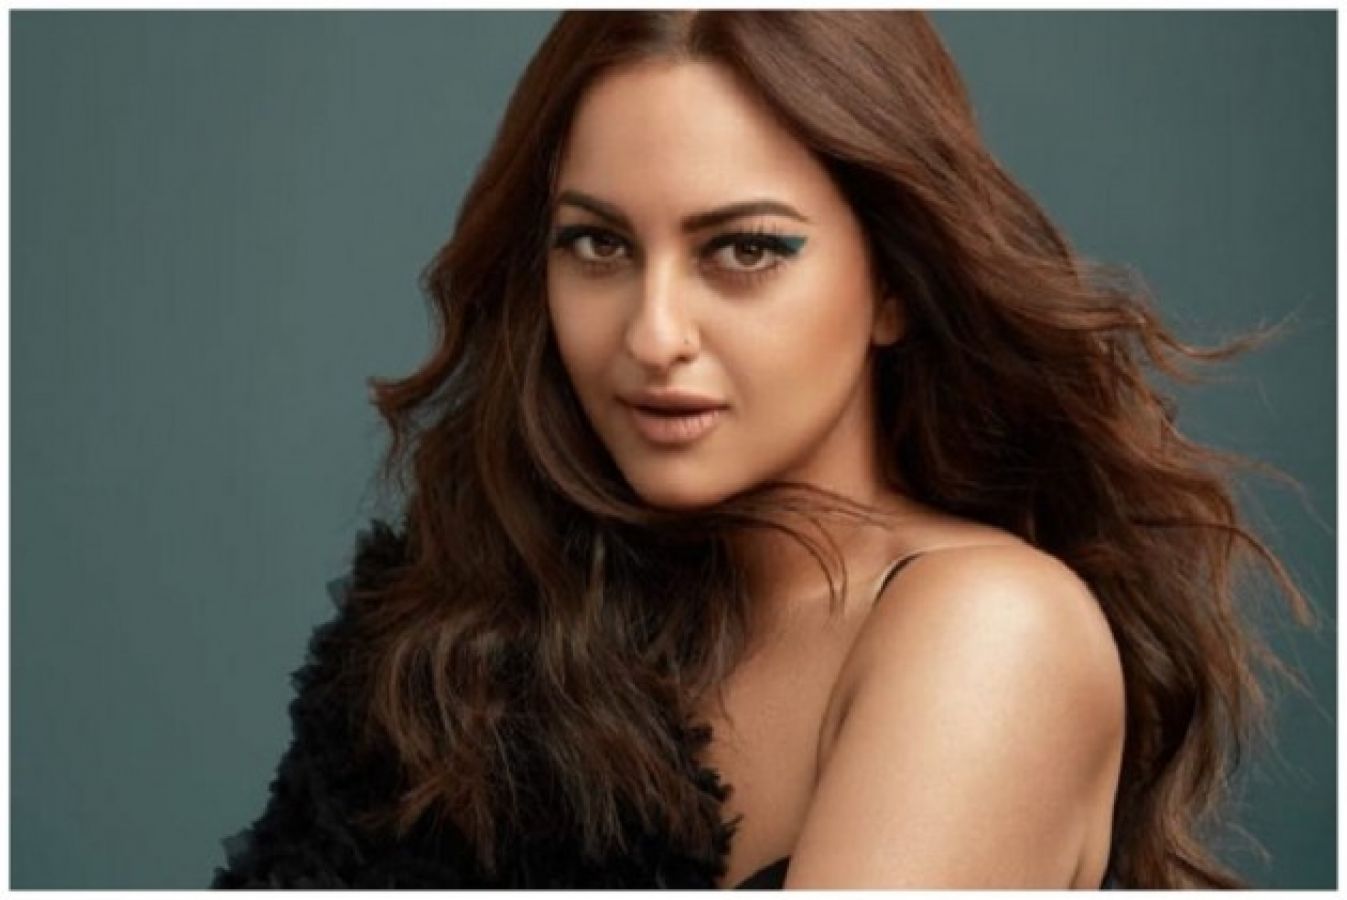 Sonakshi Heroine Ka Sexy Video - Sonakshi Sinha's hot and sexy ad shoot is setting social media on fire |  NewsTrack English 1